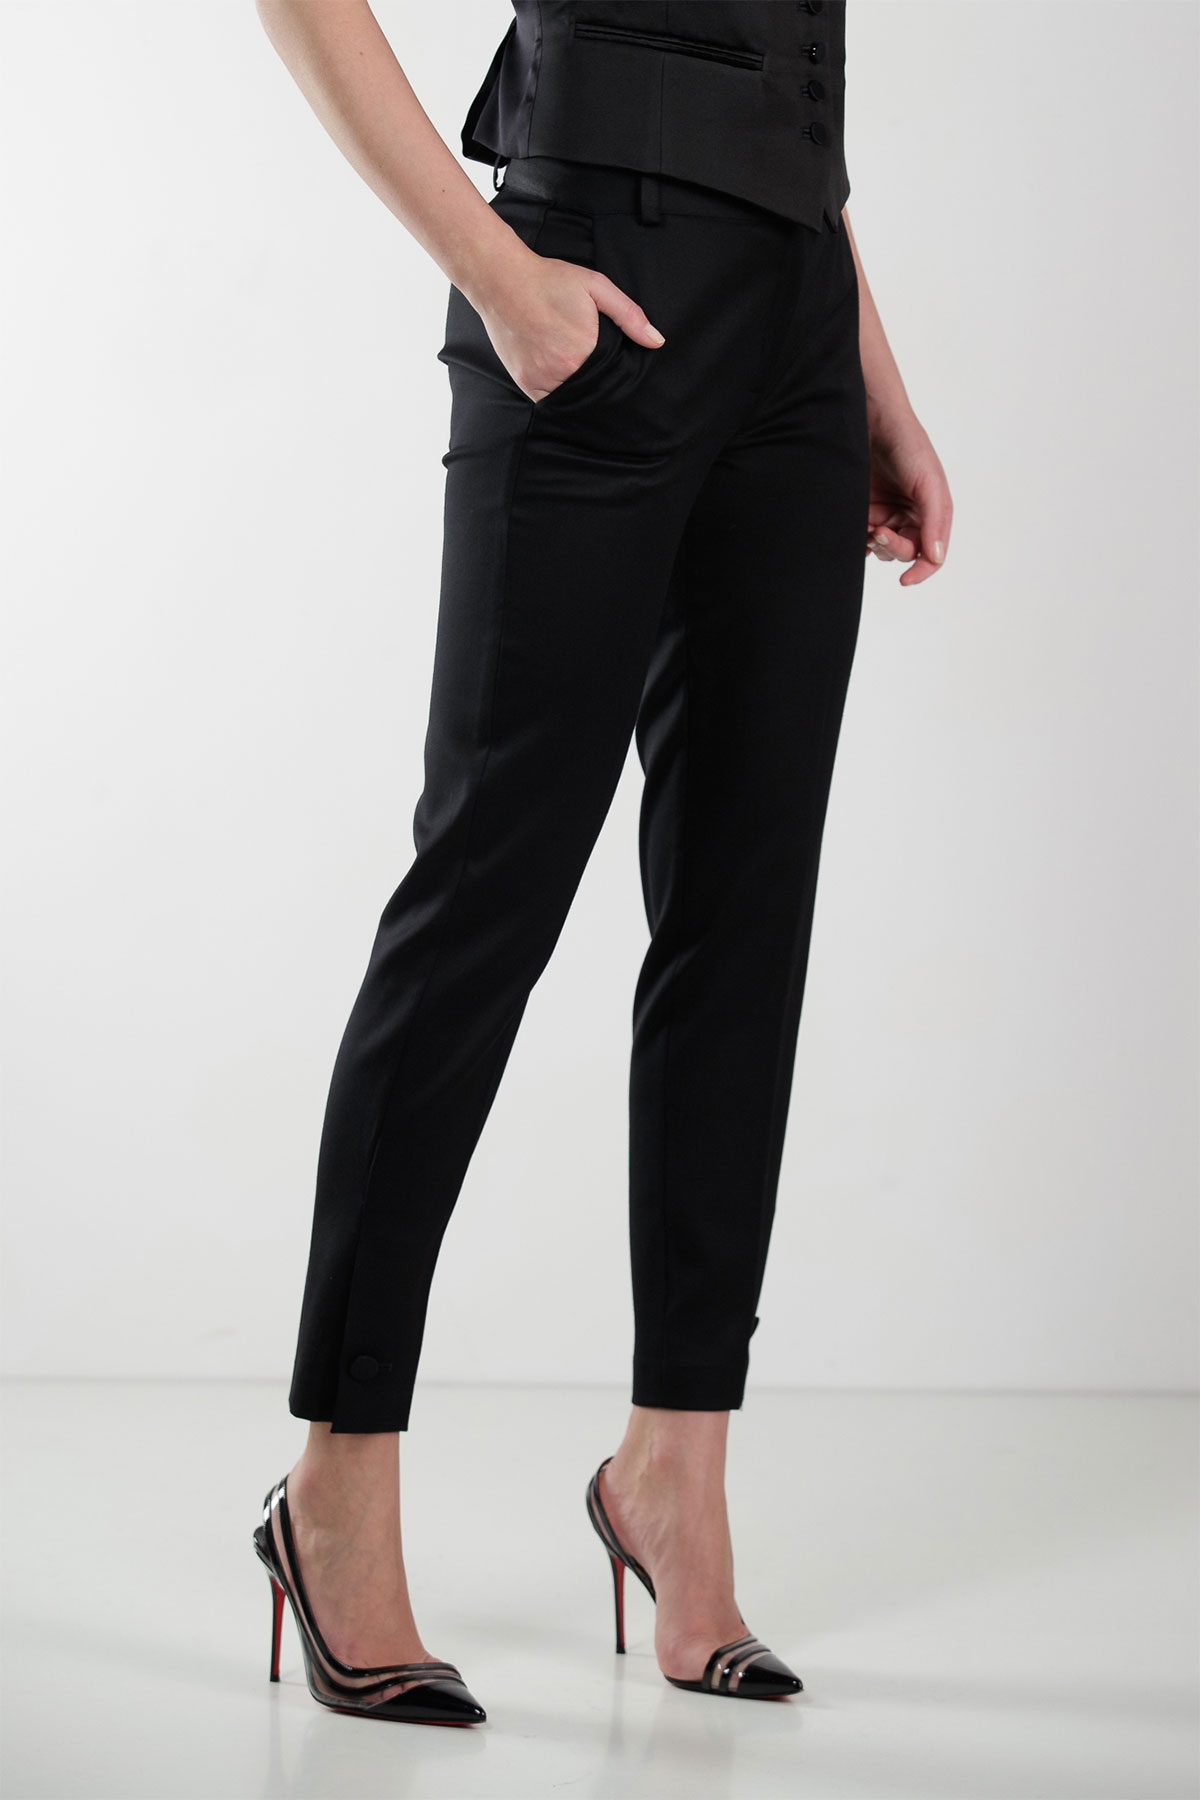 BLACK TAILORED WOOL CIGARETTE PANTS WITH BUTTON CUFF - STYLAND